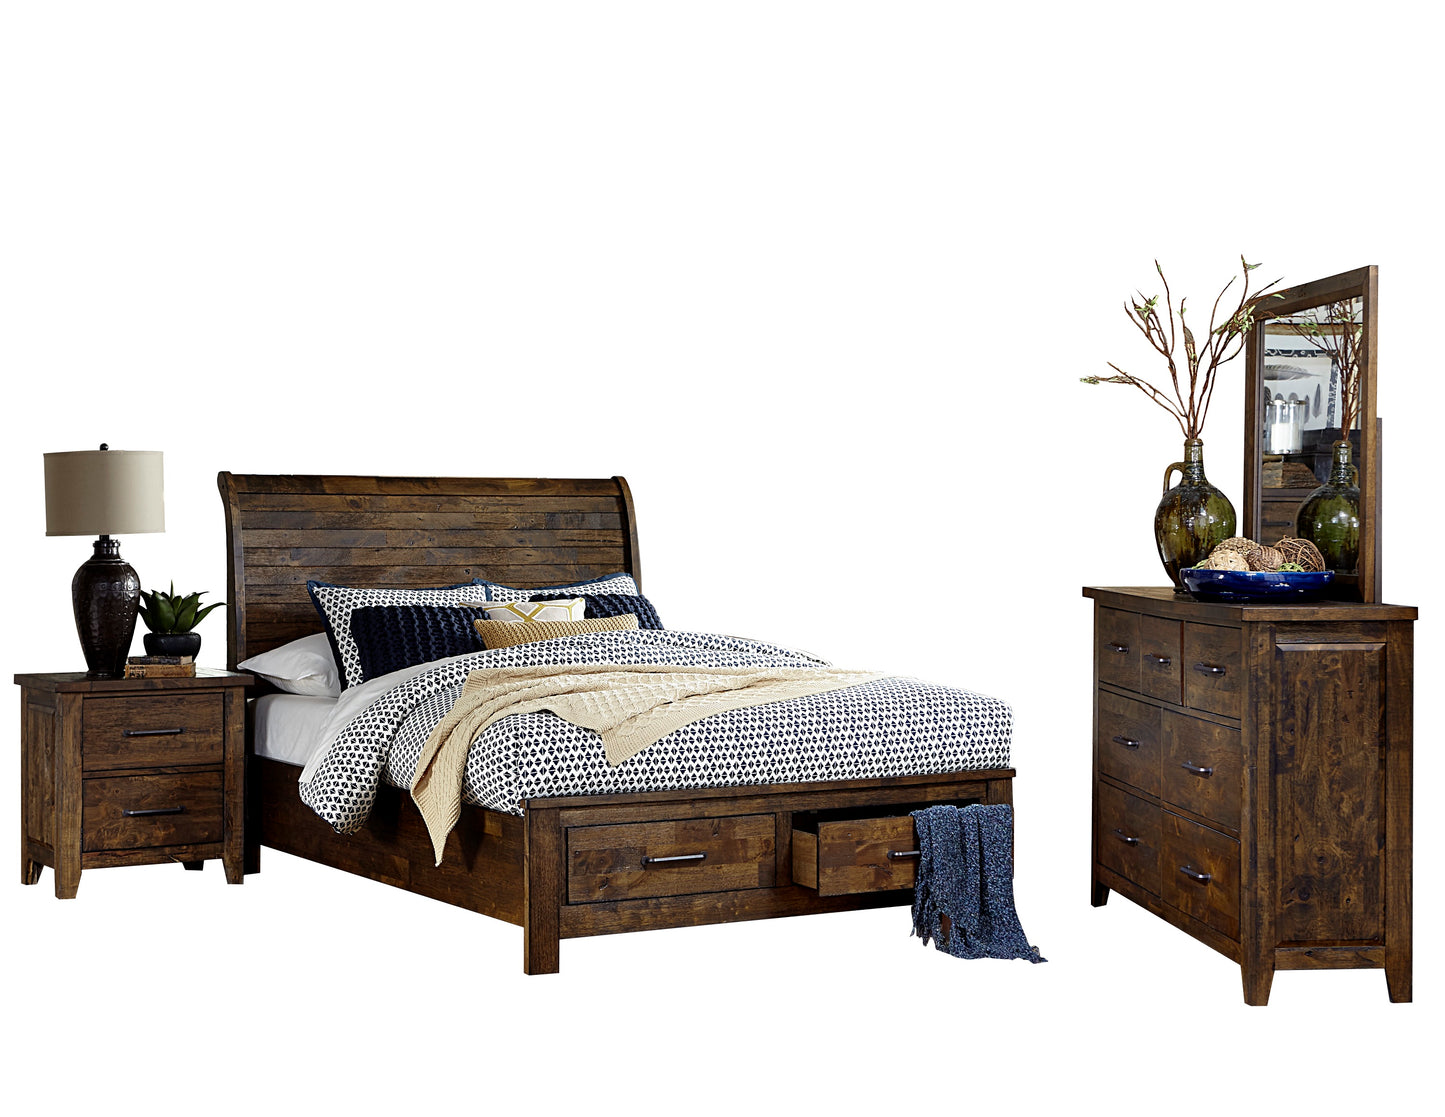 Jacoby Rustic 4PC Bedroom Set E King Sleigh Storage Bed, Dresser, Mirror, Nightstand in Country Brown